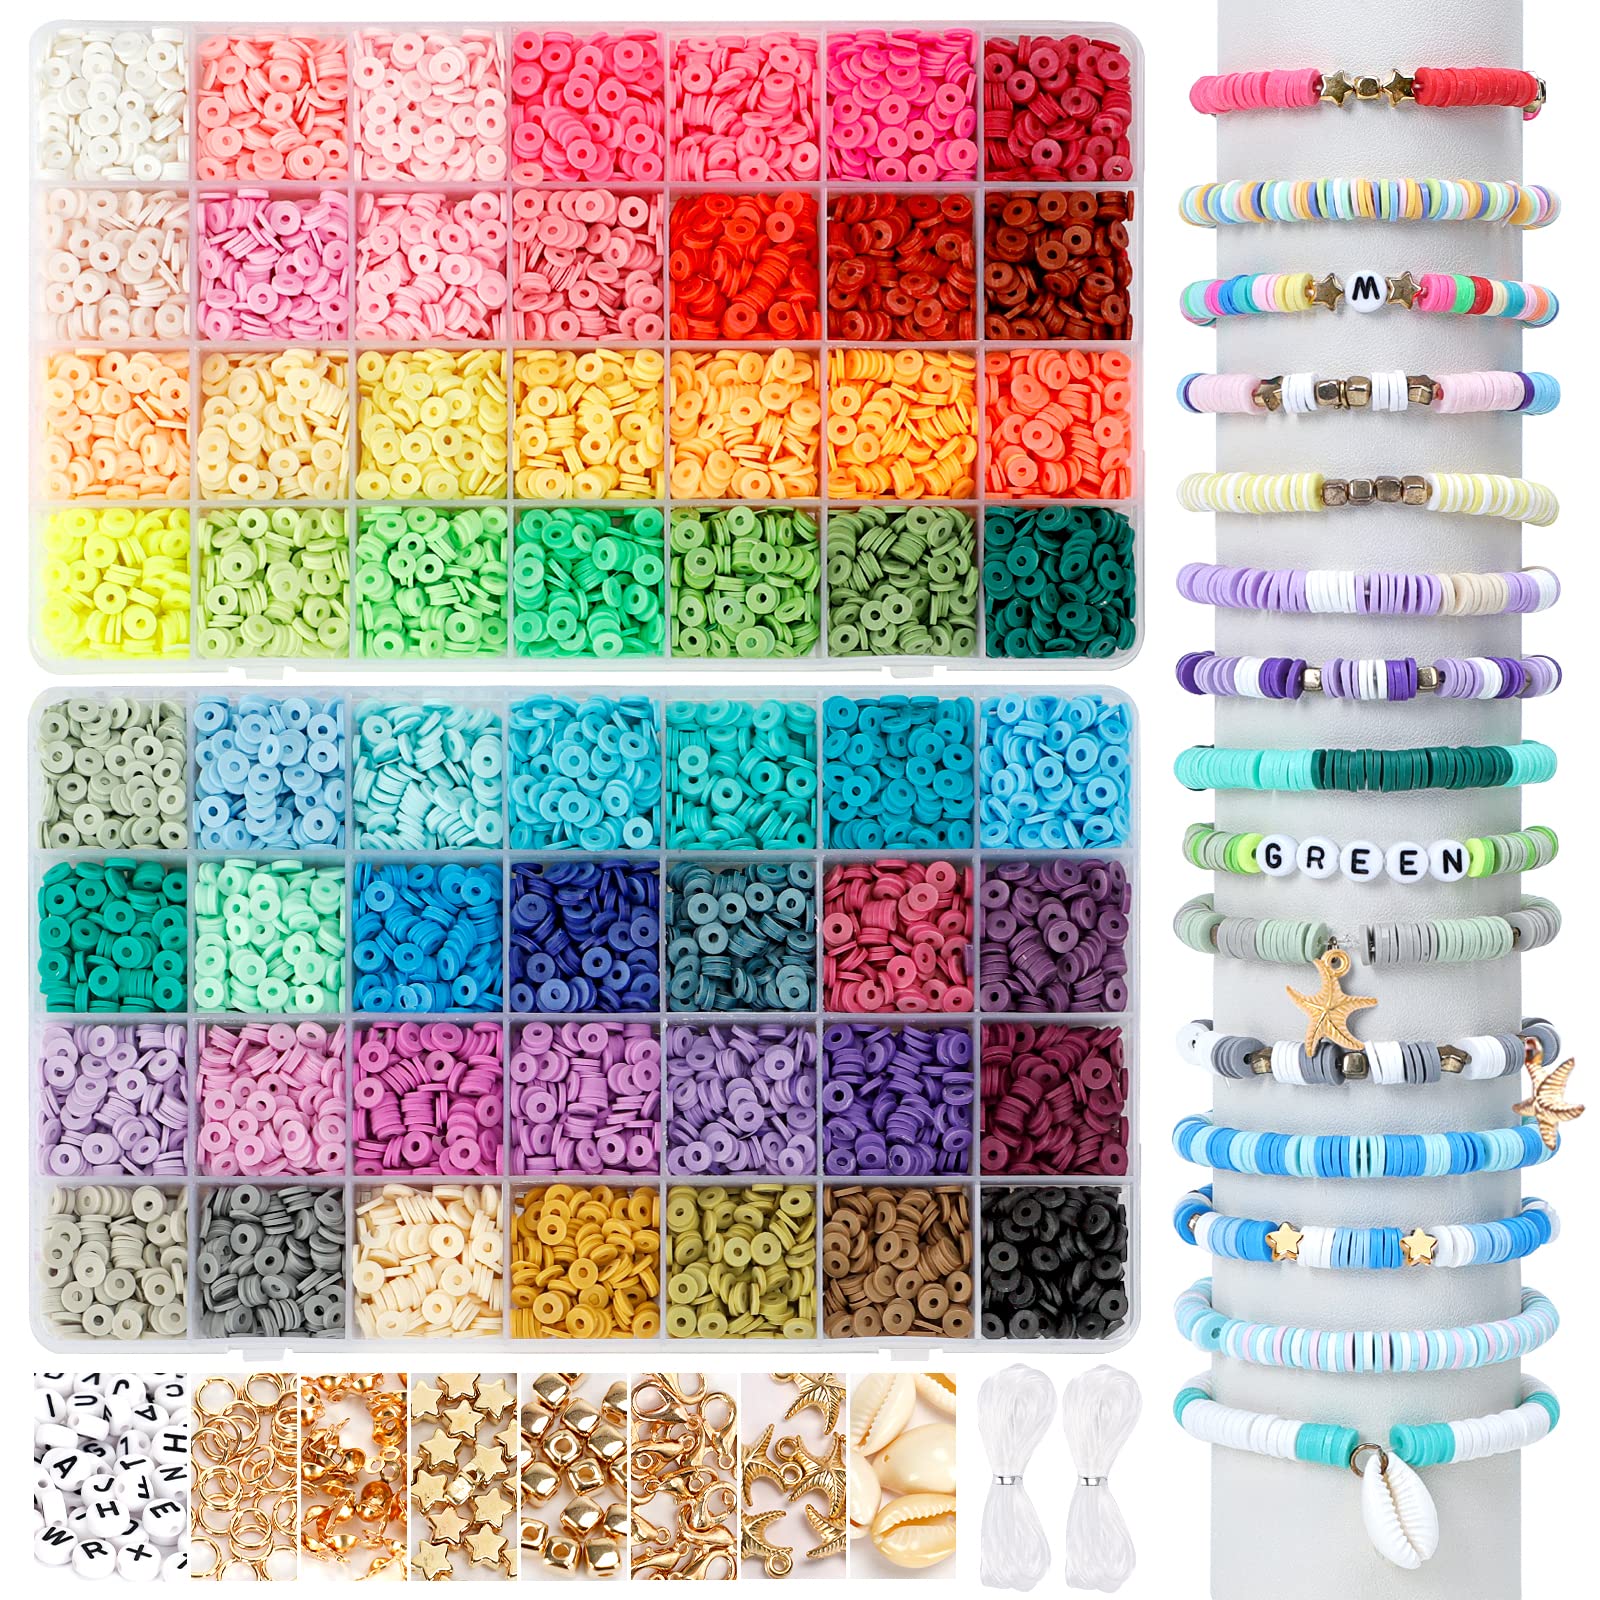 QUEFE 14420pcs Clay Beads for Bracelet Making Kit, 56 Colors